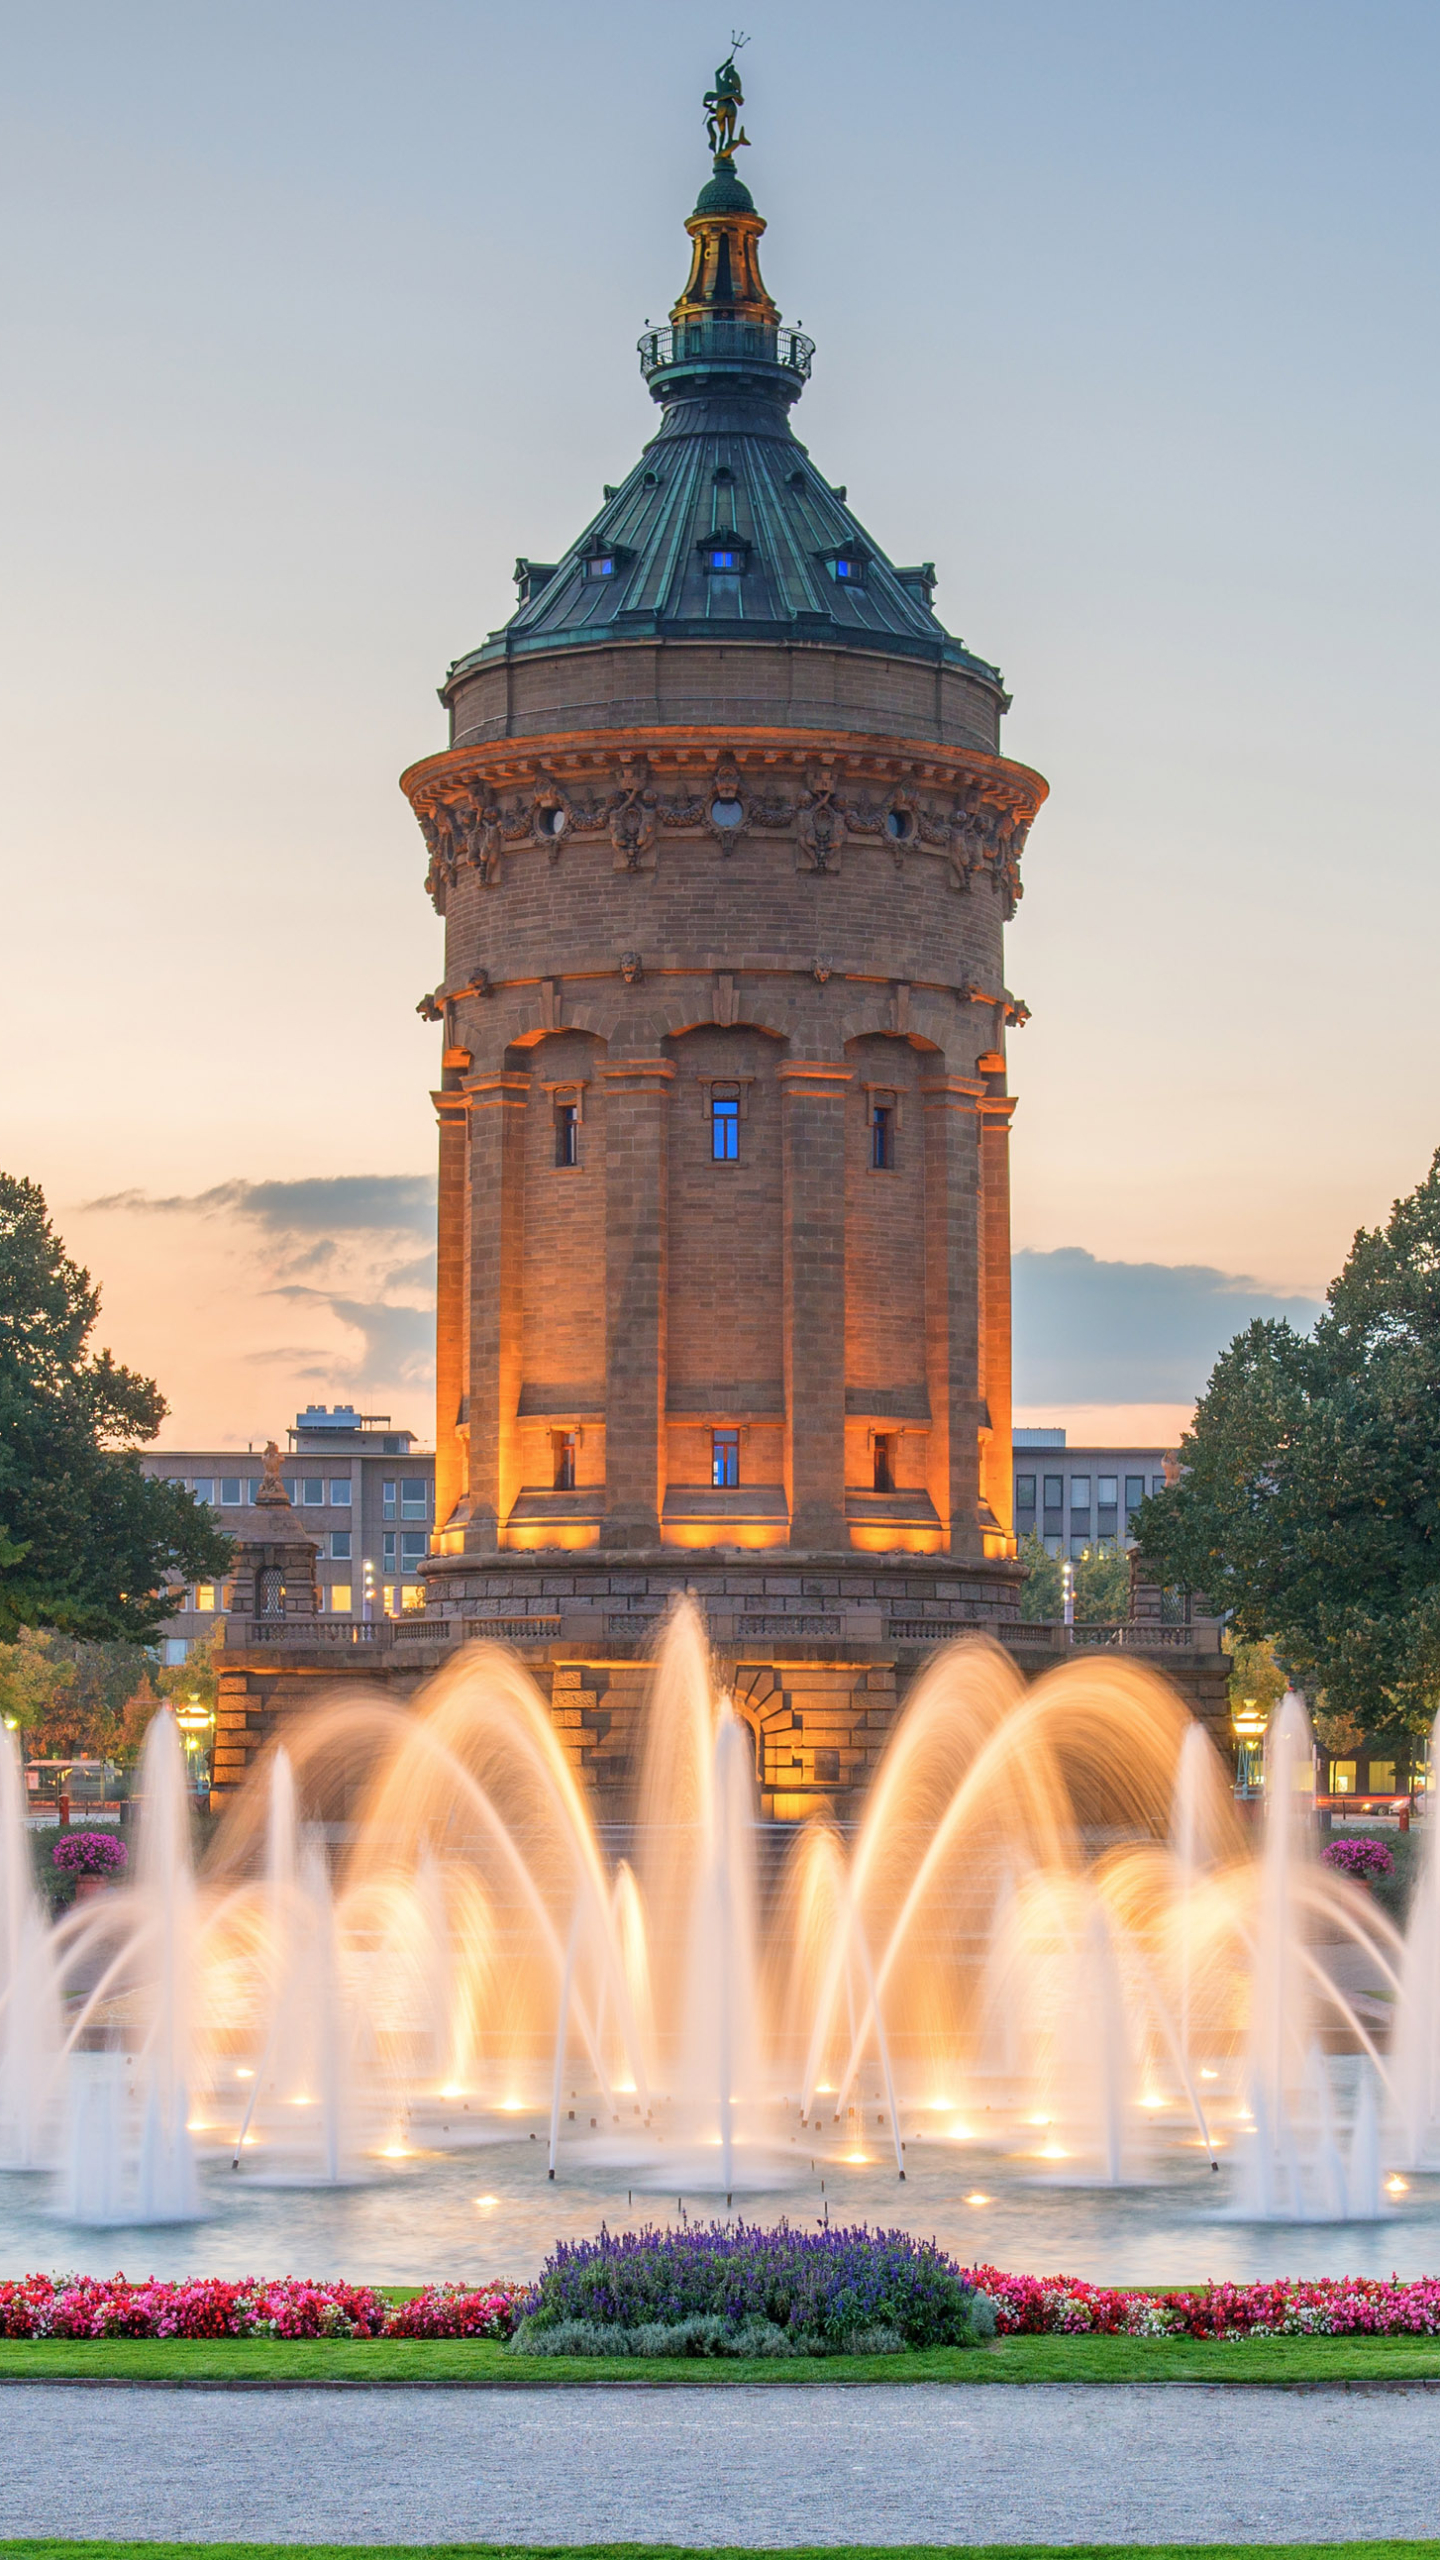 Mannheim Water Tower, Germany